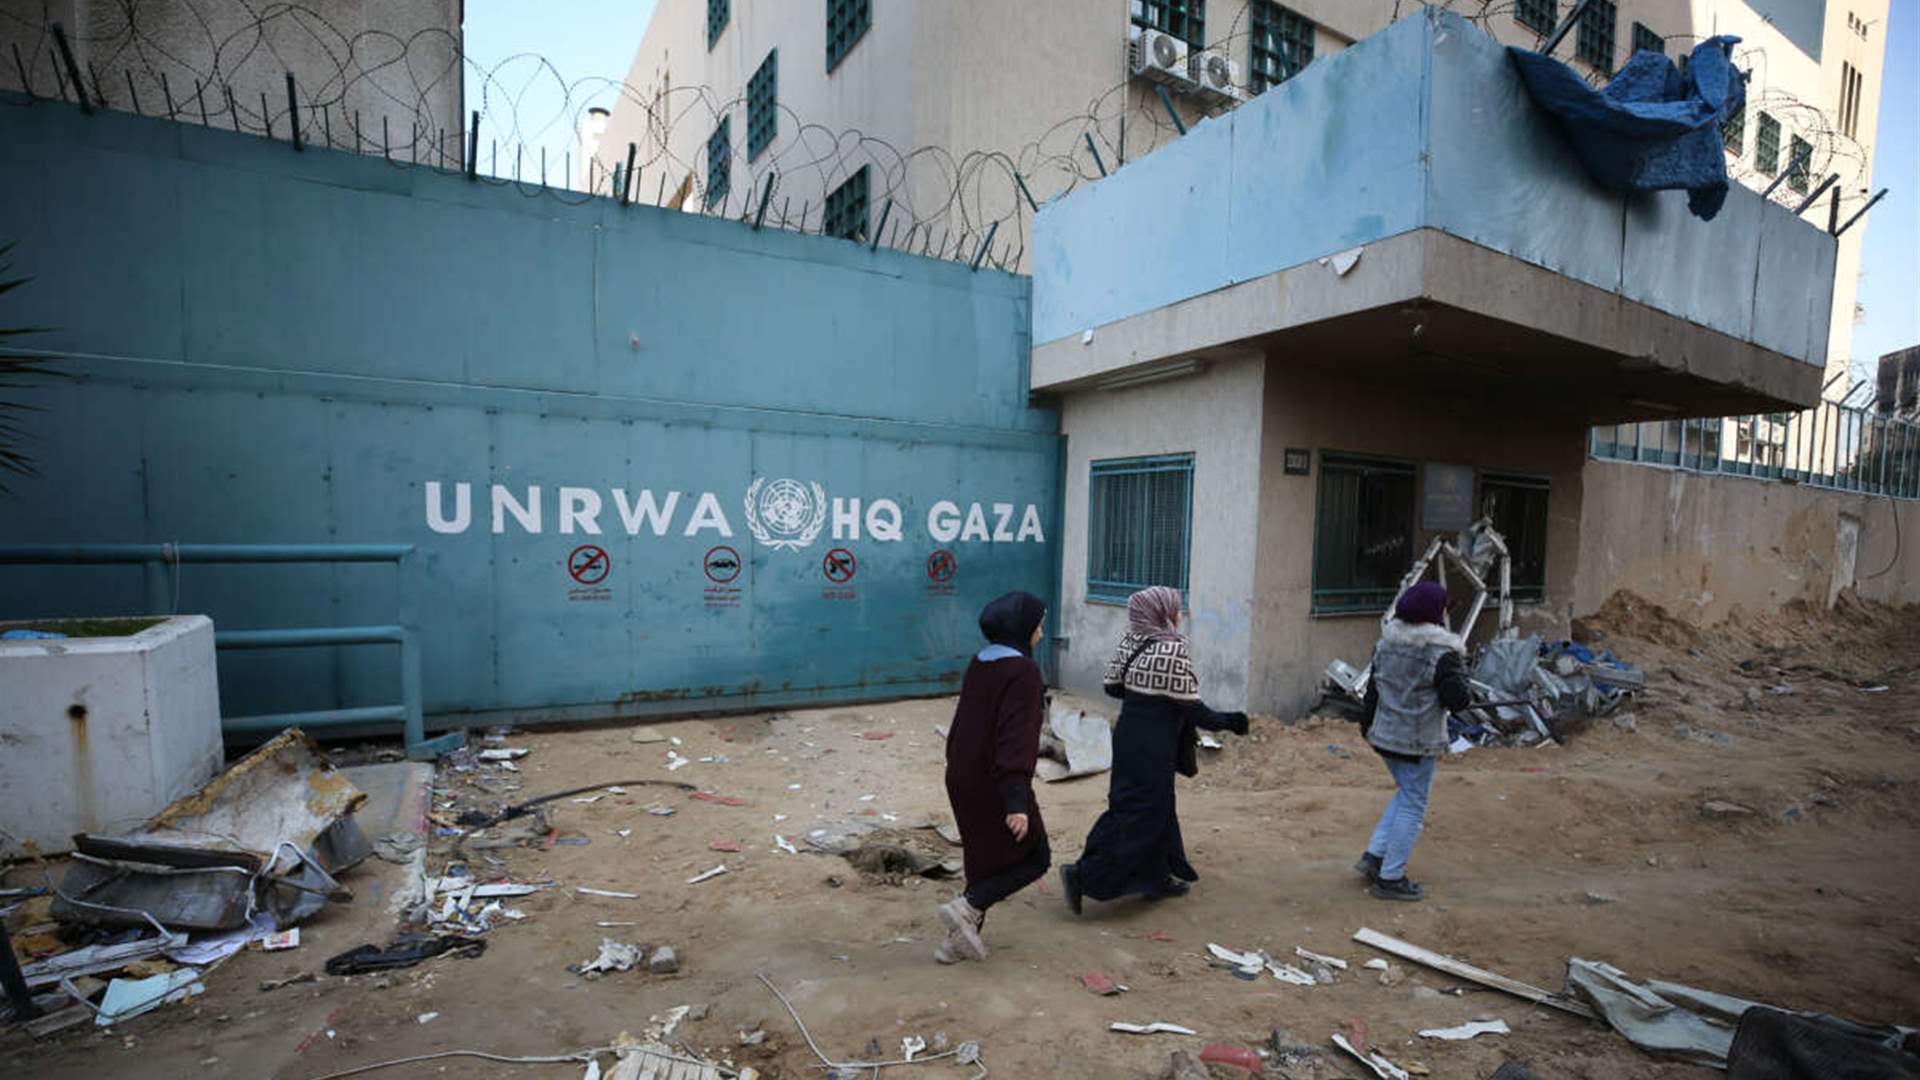 UNRWA closes office complex in East Jerusalem after &#39;Israeli extremists&#39; attempted to set it on fire